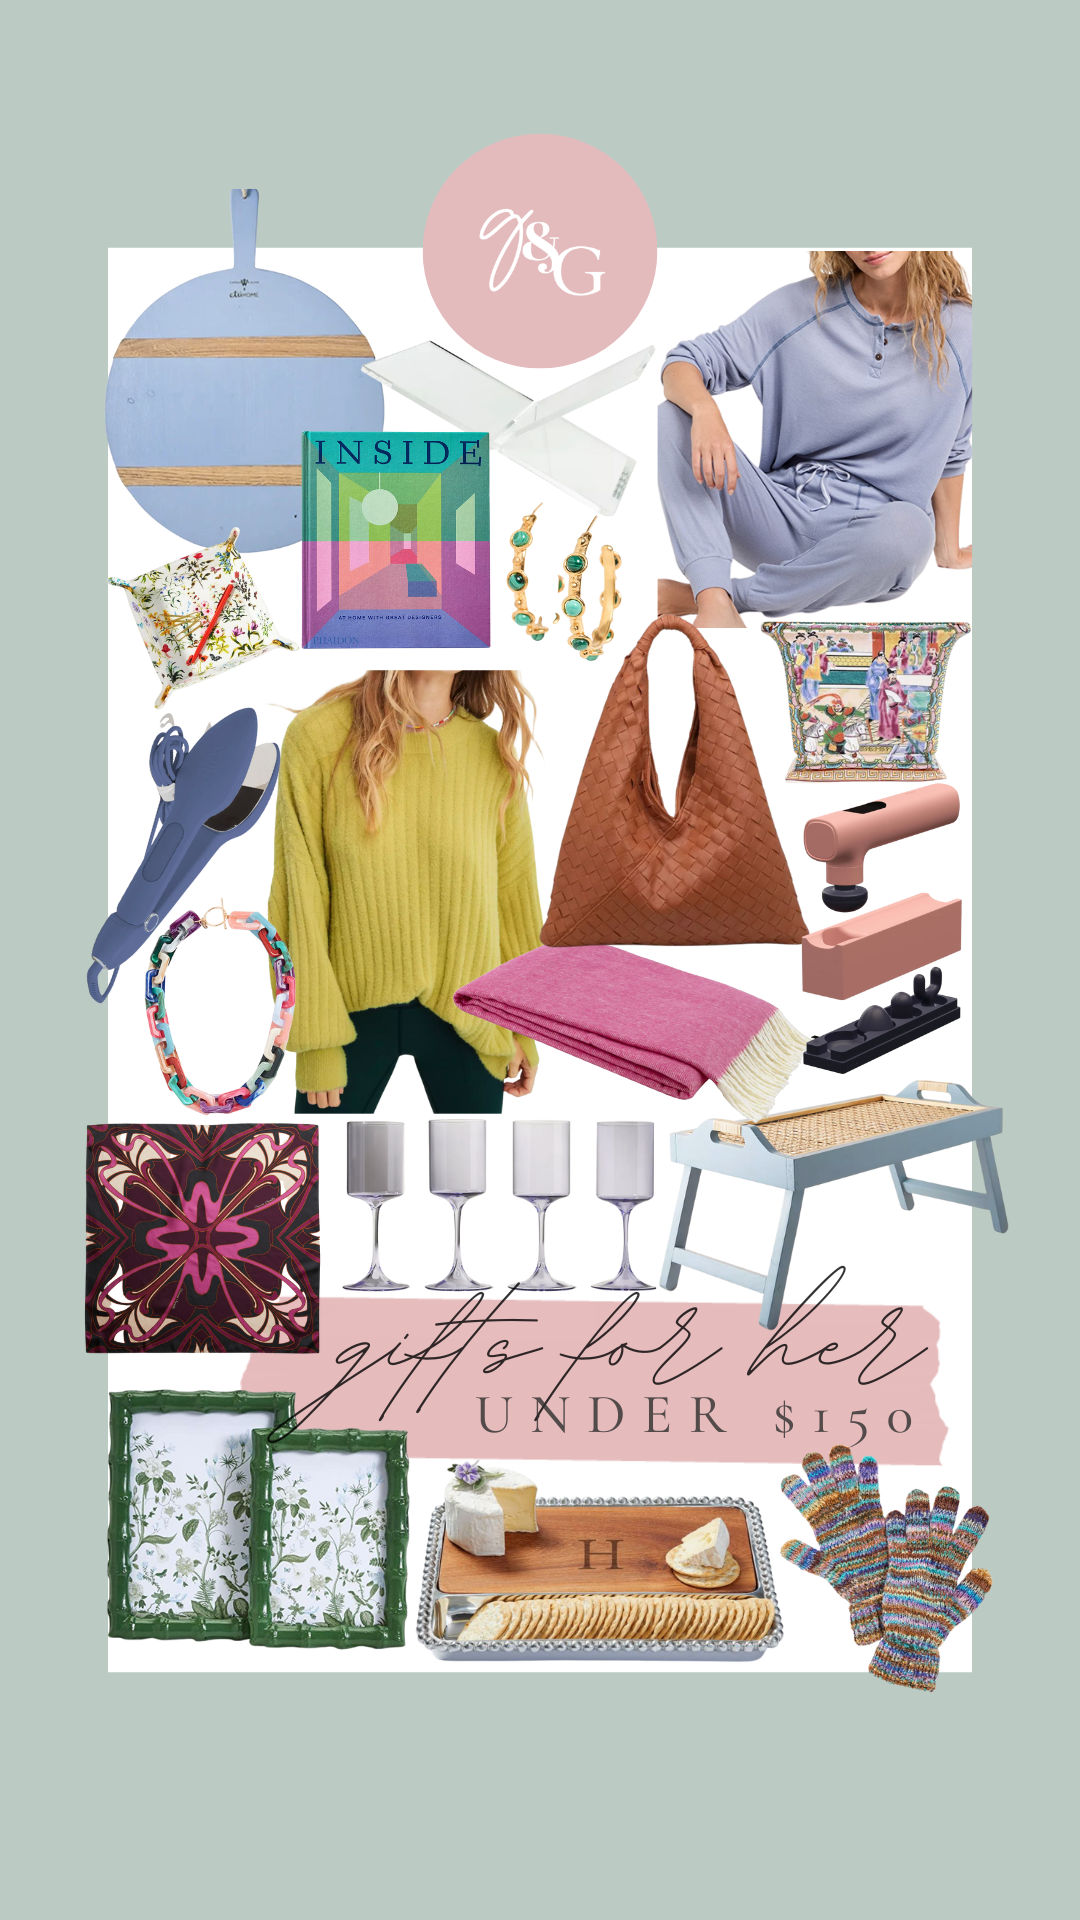 Gifts $25 & Under! Him & Her Edition - Glitter & Gingham